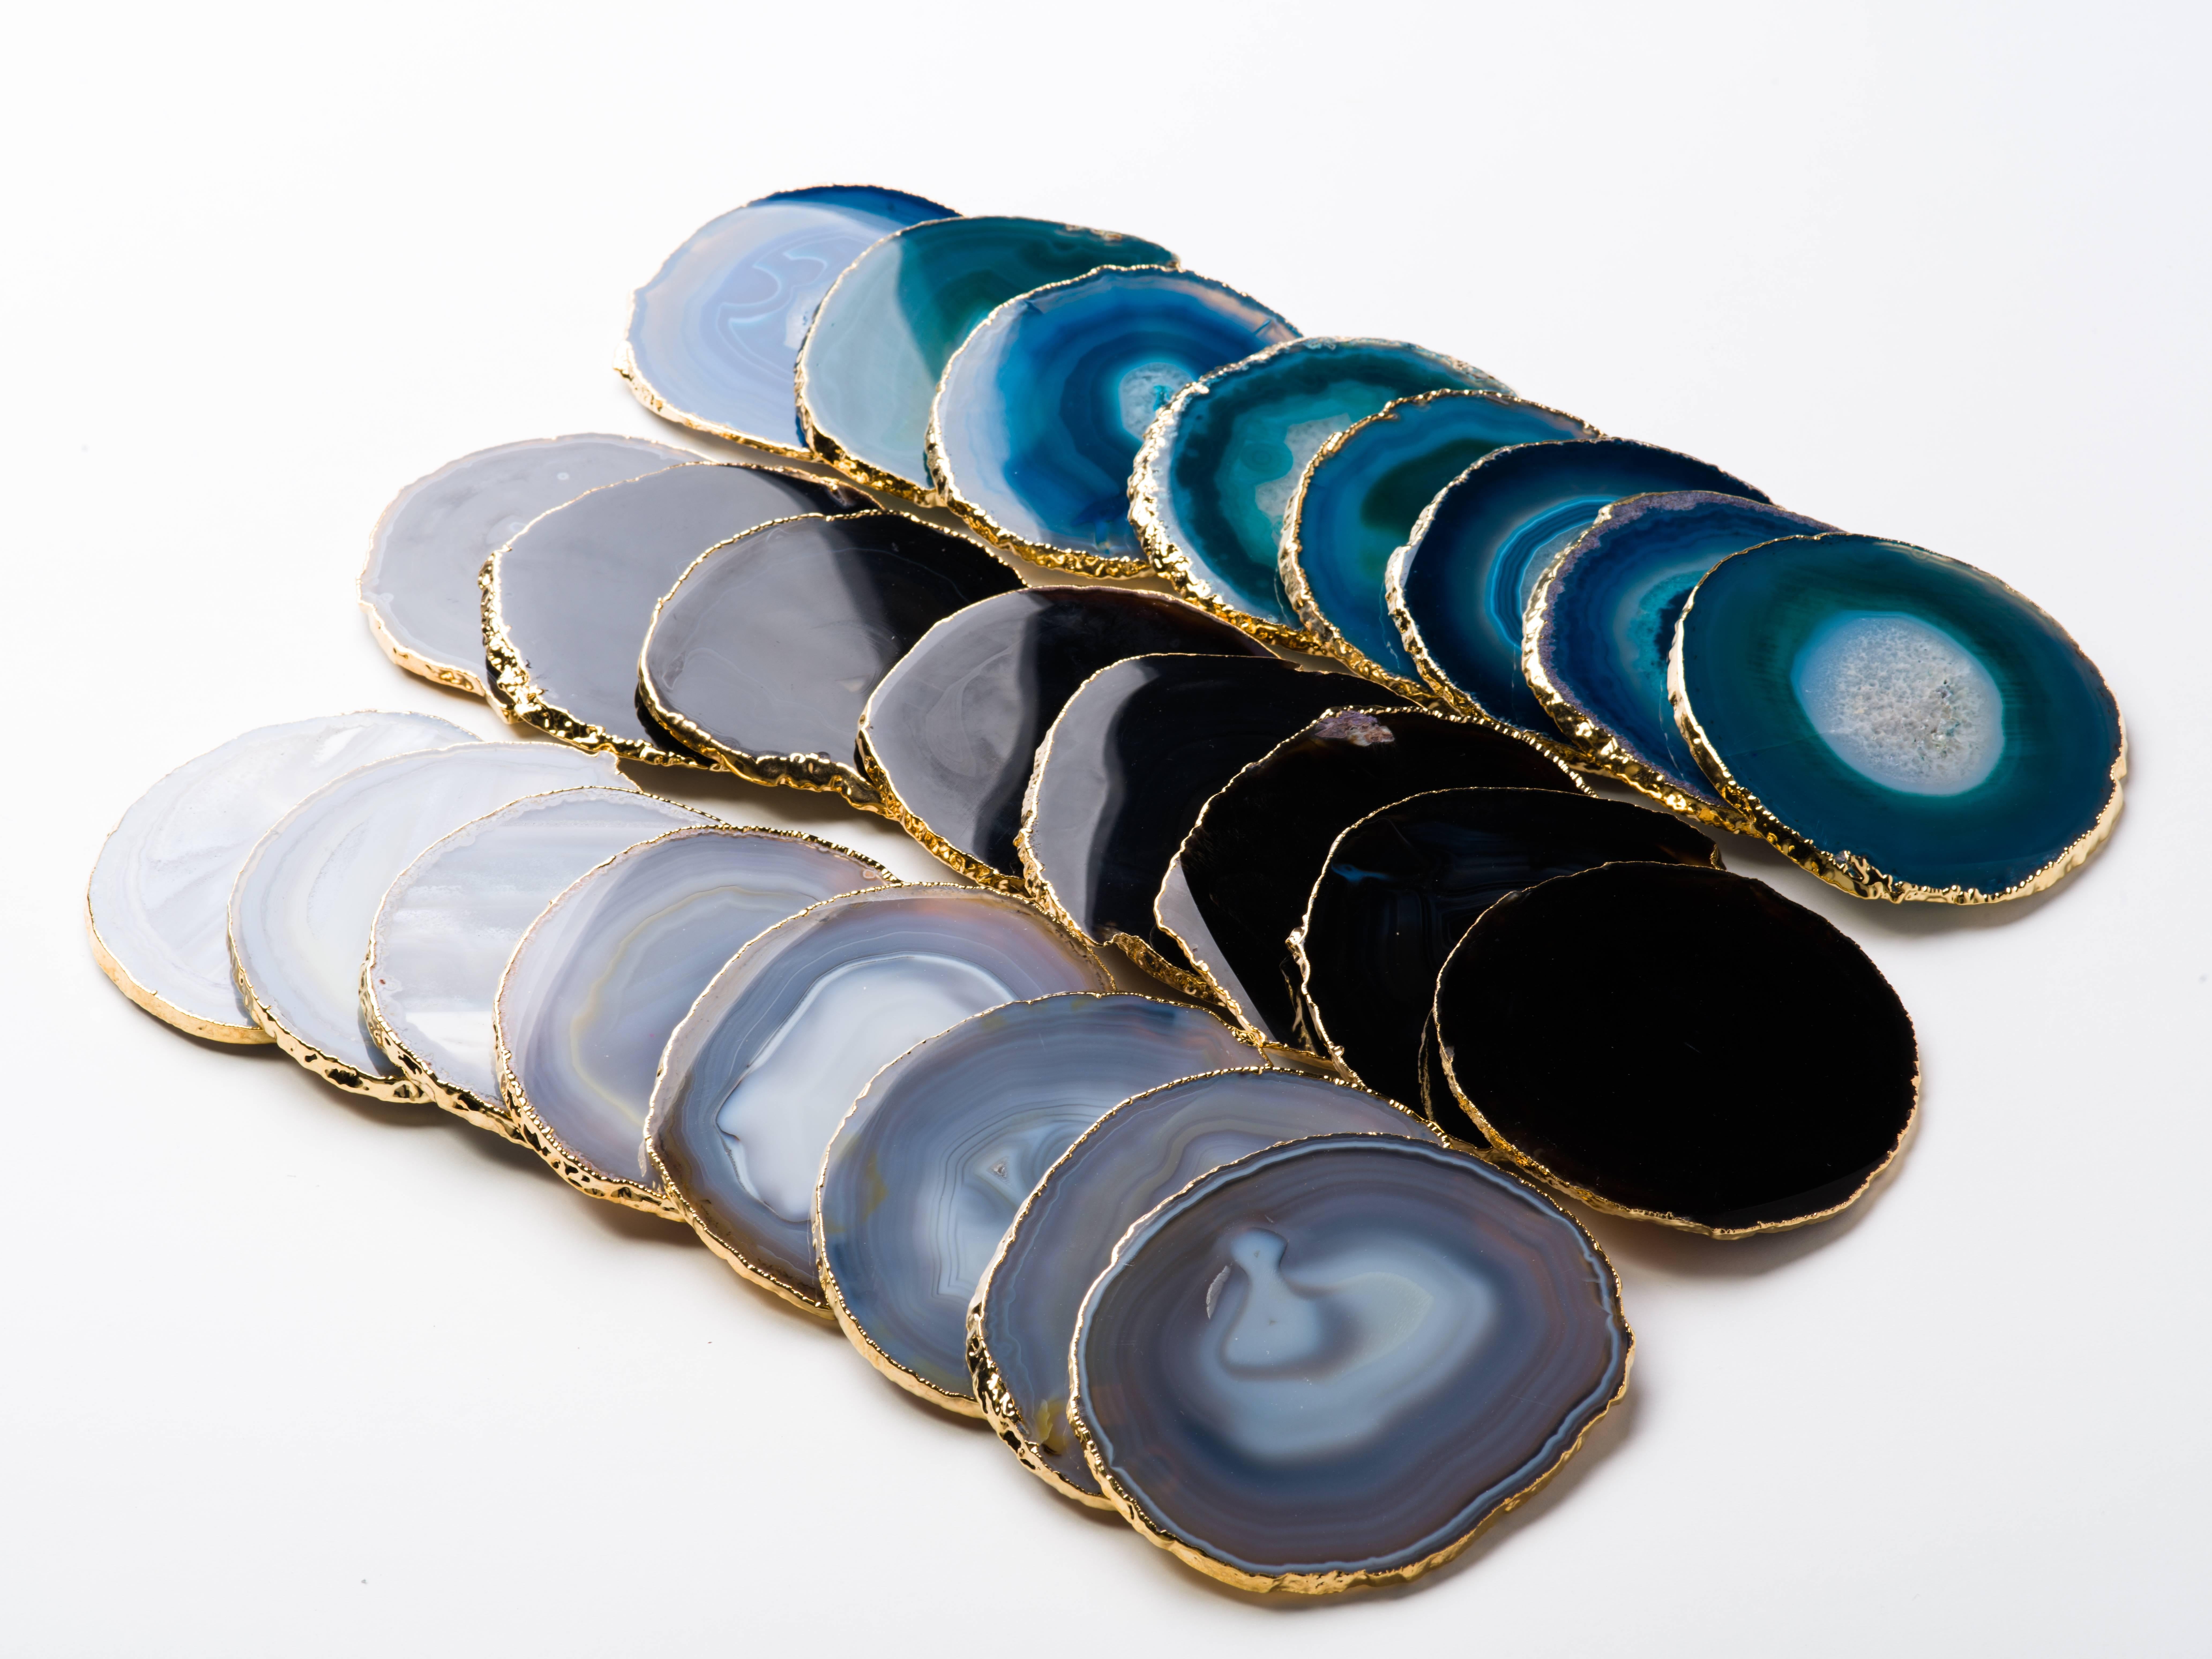 Contemporary Natural Agate and Crystal Coasters in Teal with 24-Karat Gold Trim, Set/8 For Sale